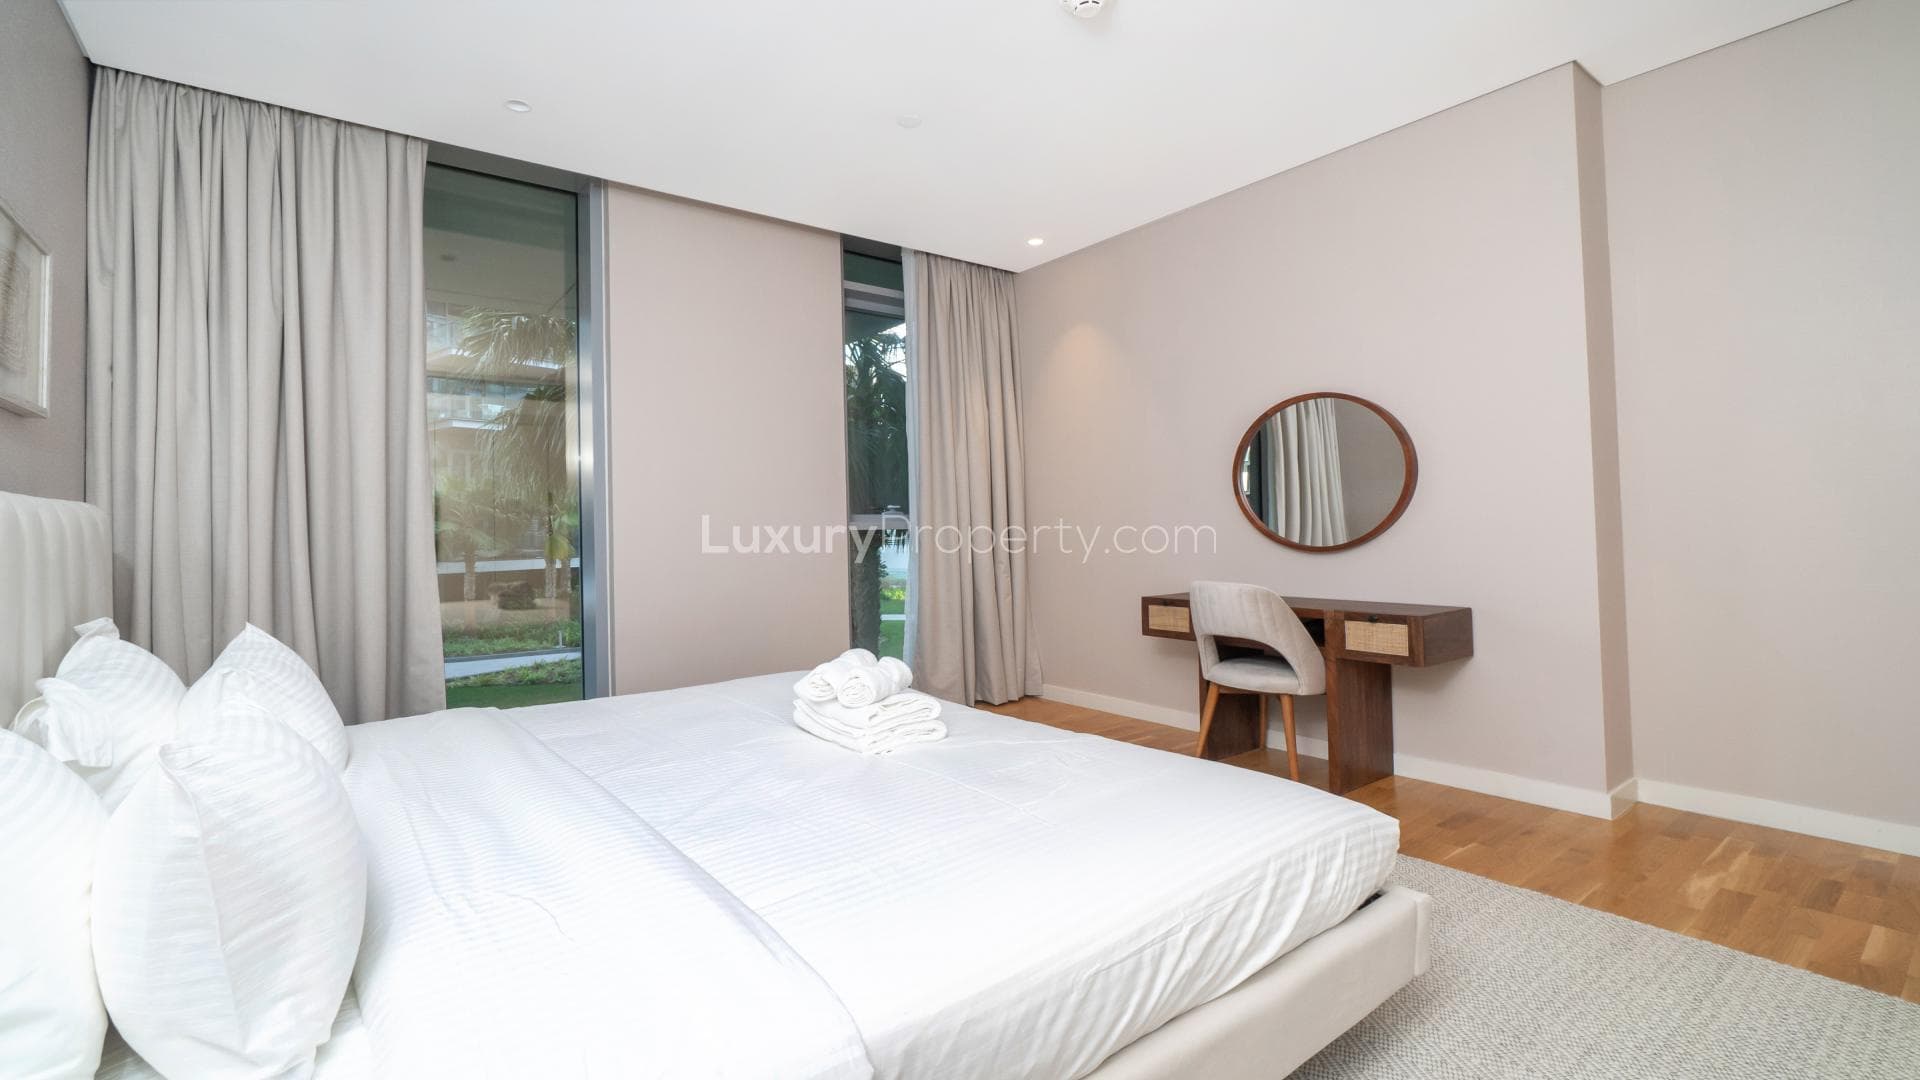 1 Bedroom Apartment For Sale Bluewaters Residences Lp18155 224a67ee414e1c00.jpg